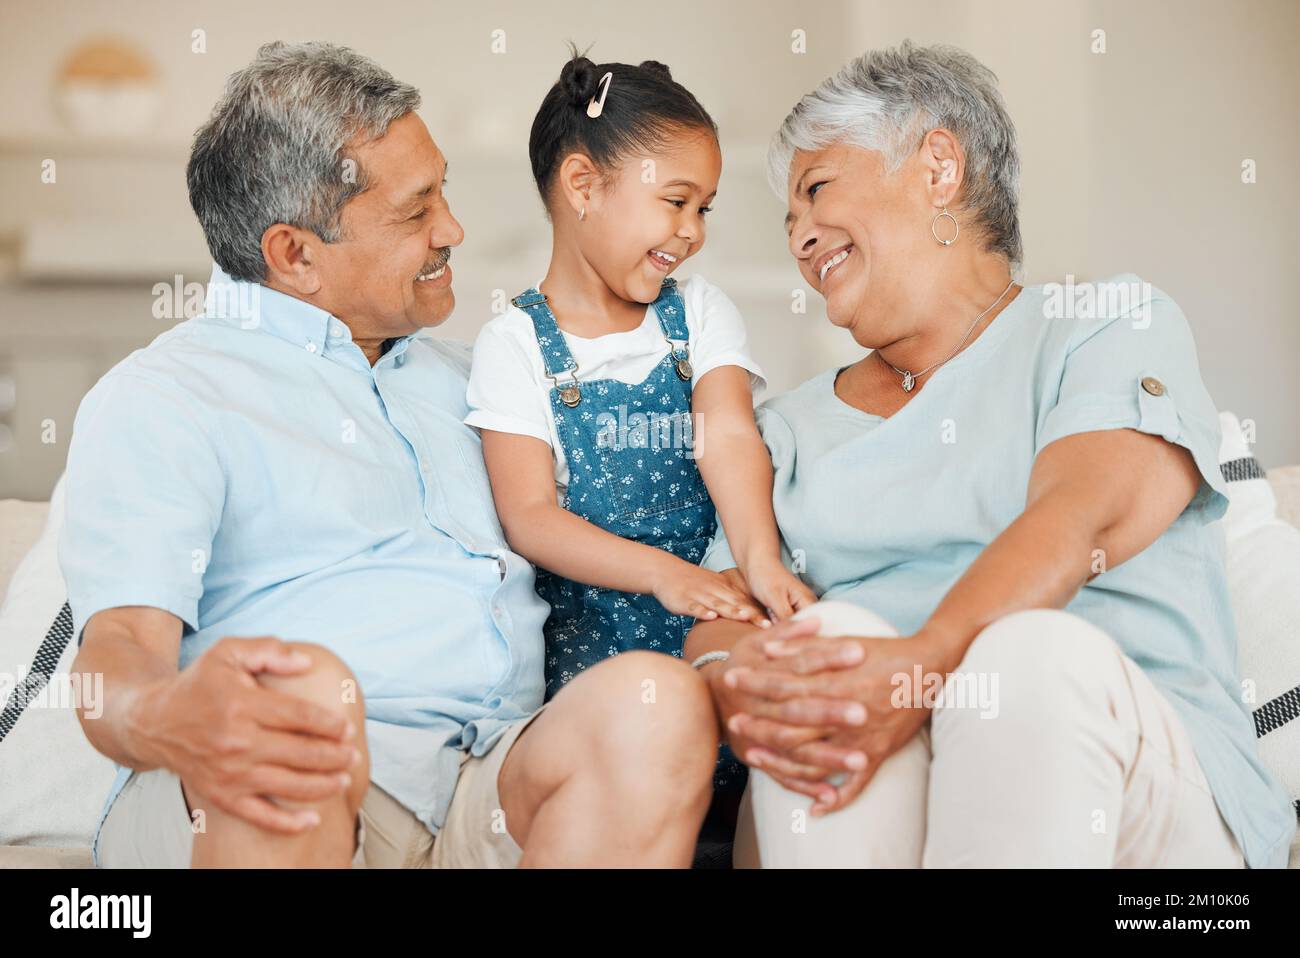 Hold on to your family and friends. grandparents bonding with their granddaughter on a sofa at home. Stock Photo